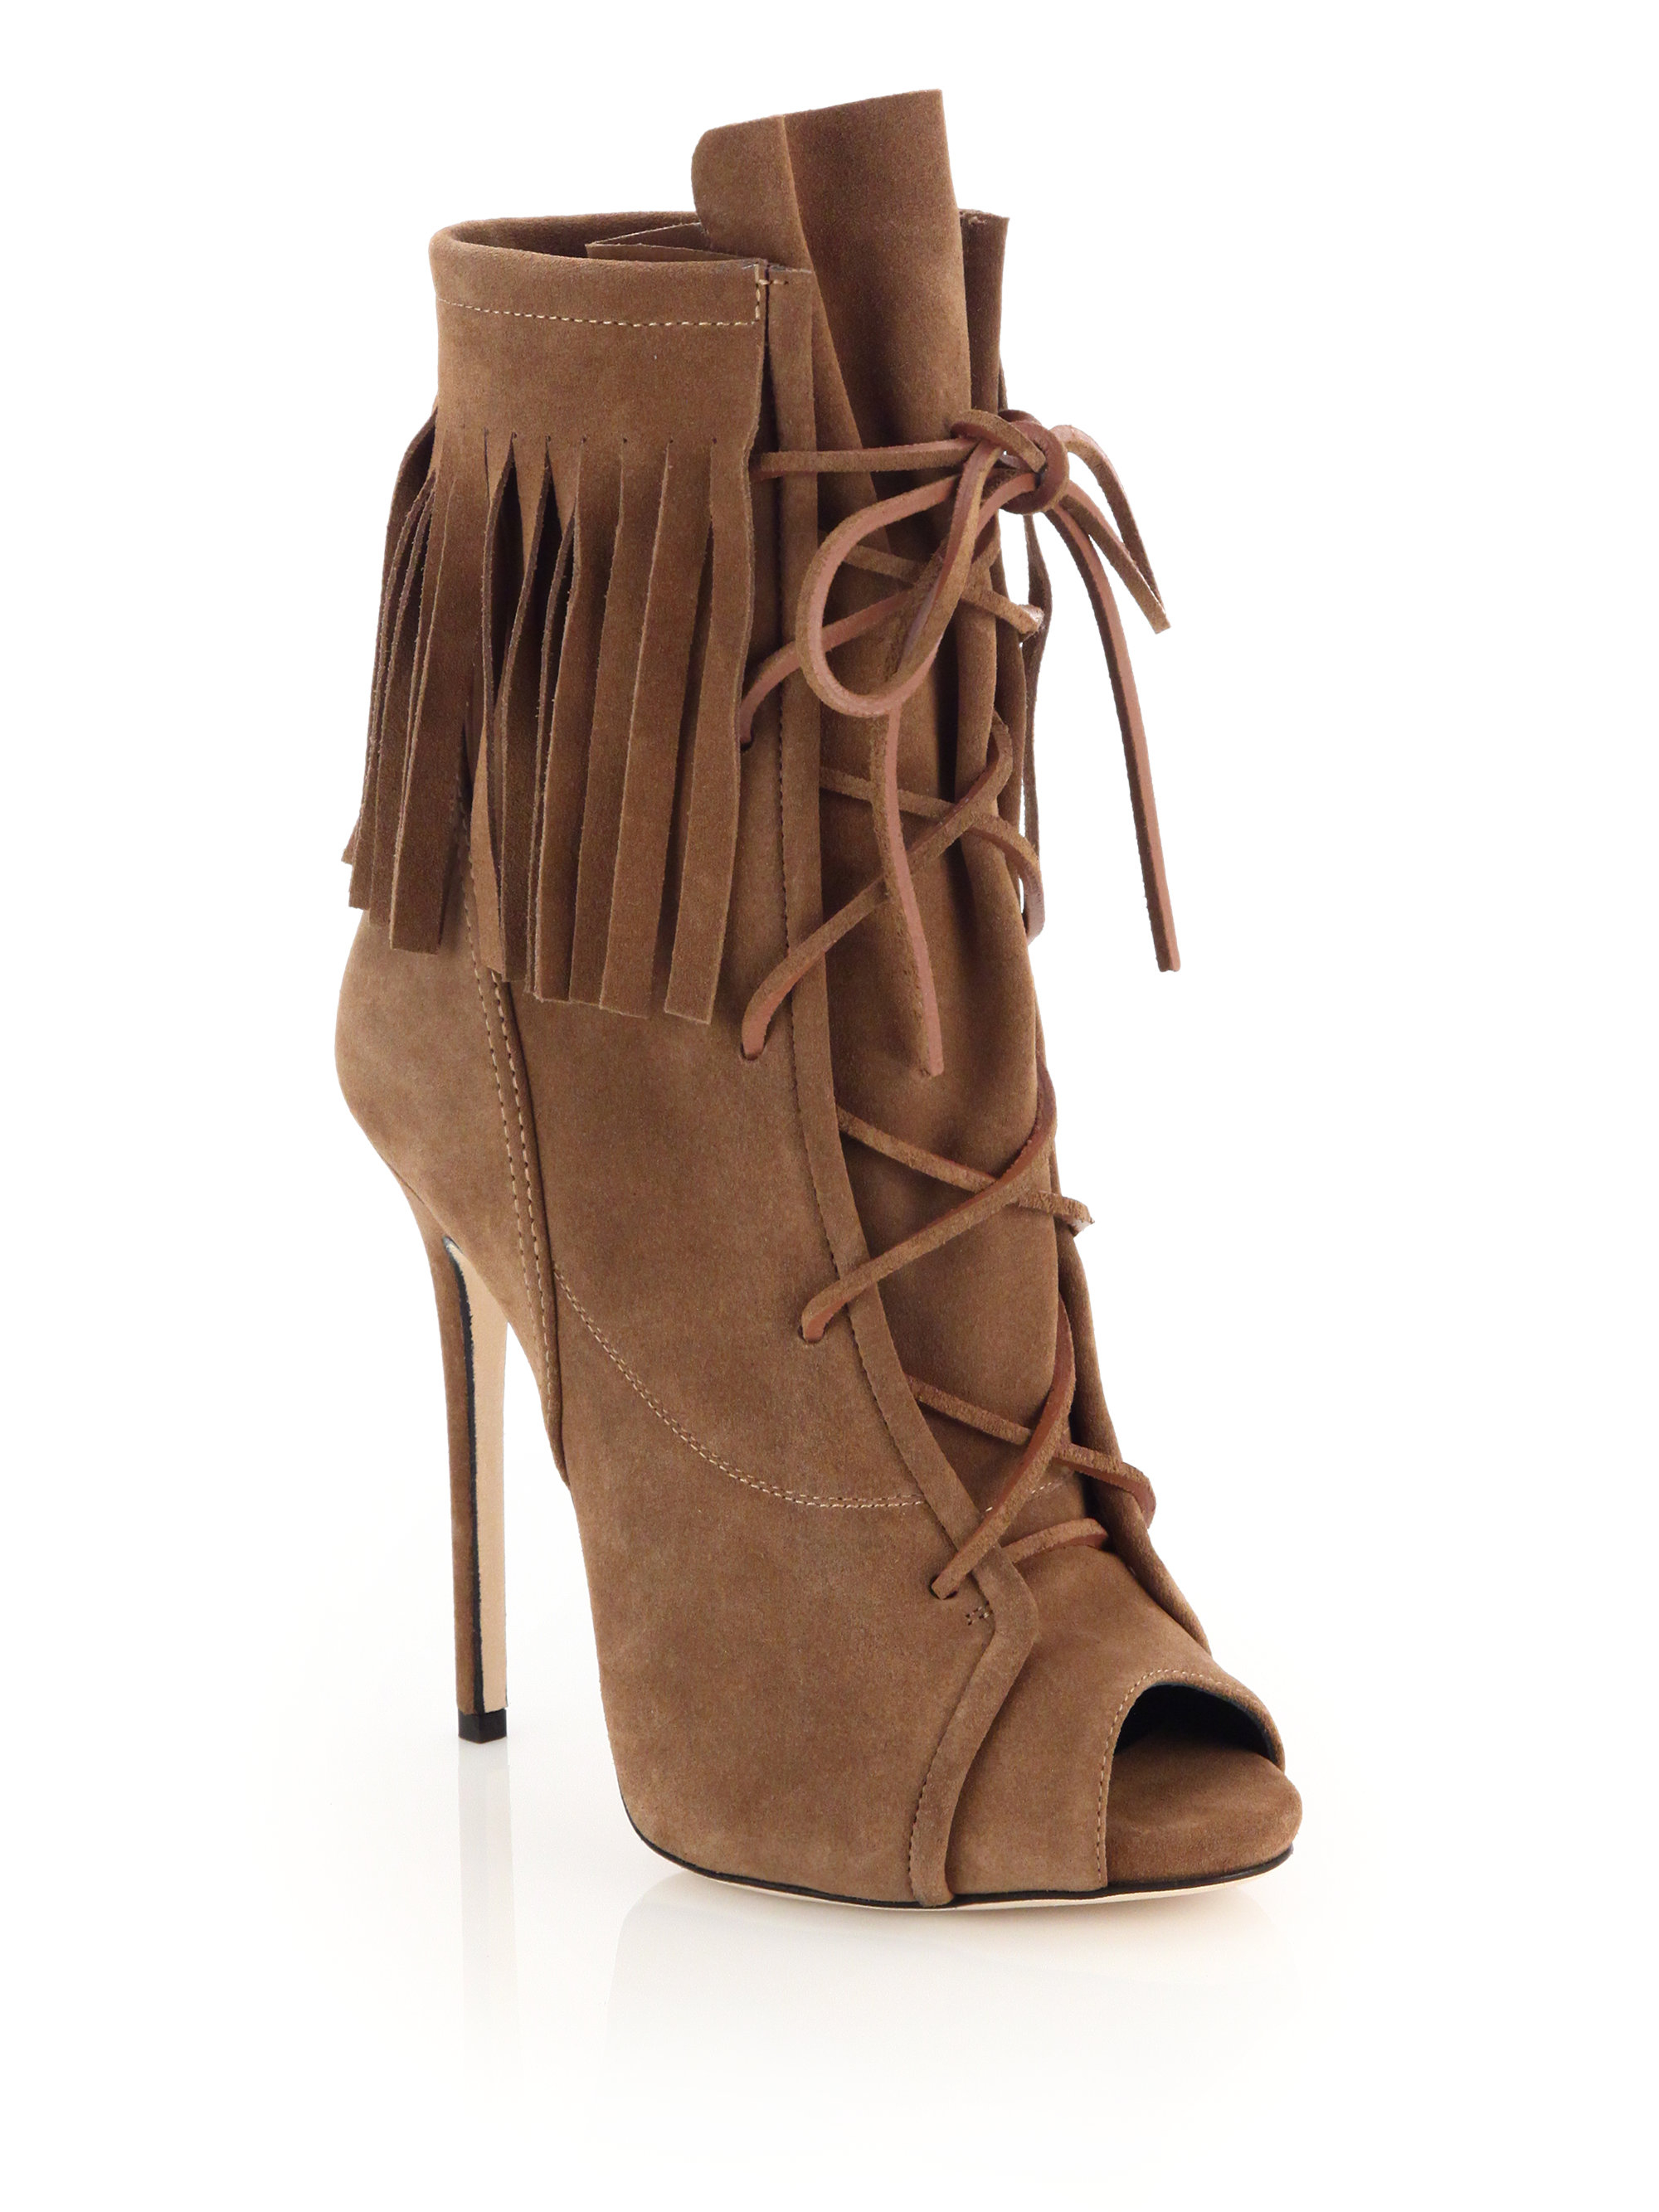 Lyst - Giuseppe Zanotti Fringed Suede Lace-up Peep-toe Booties in Brown